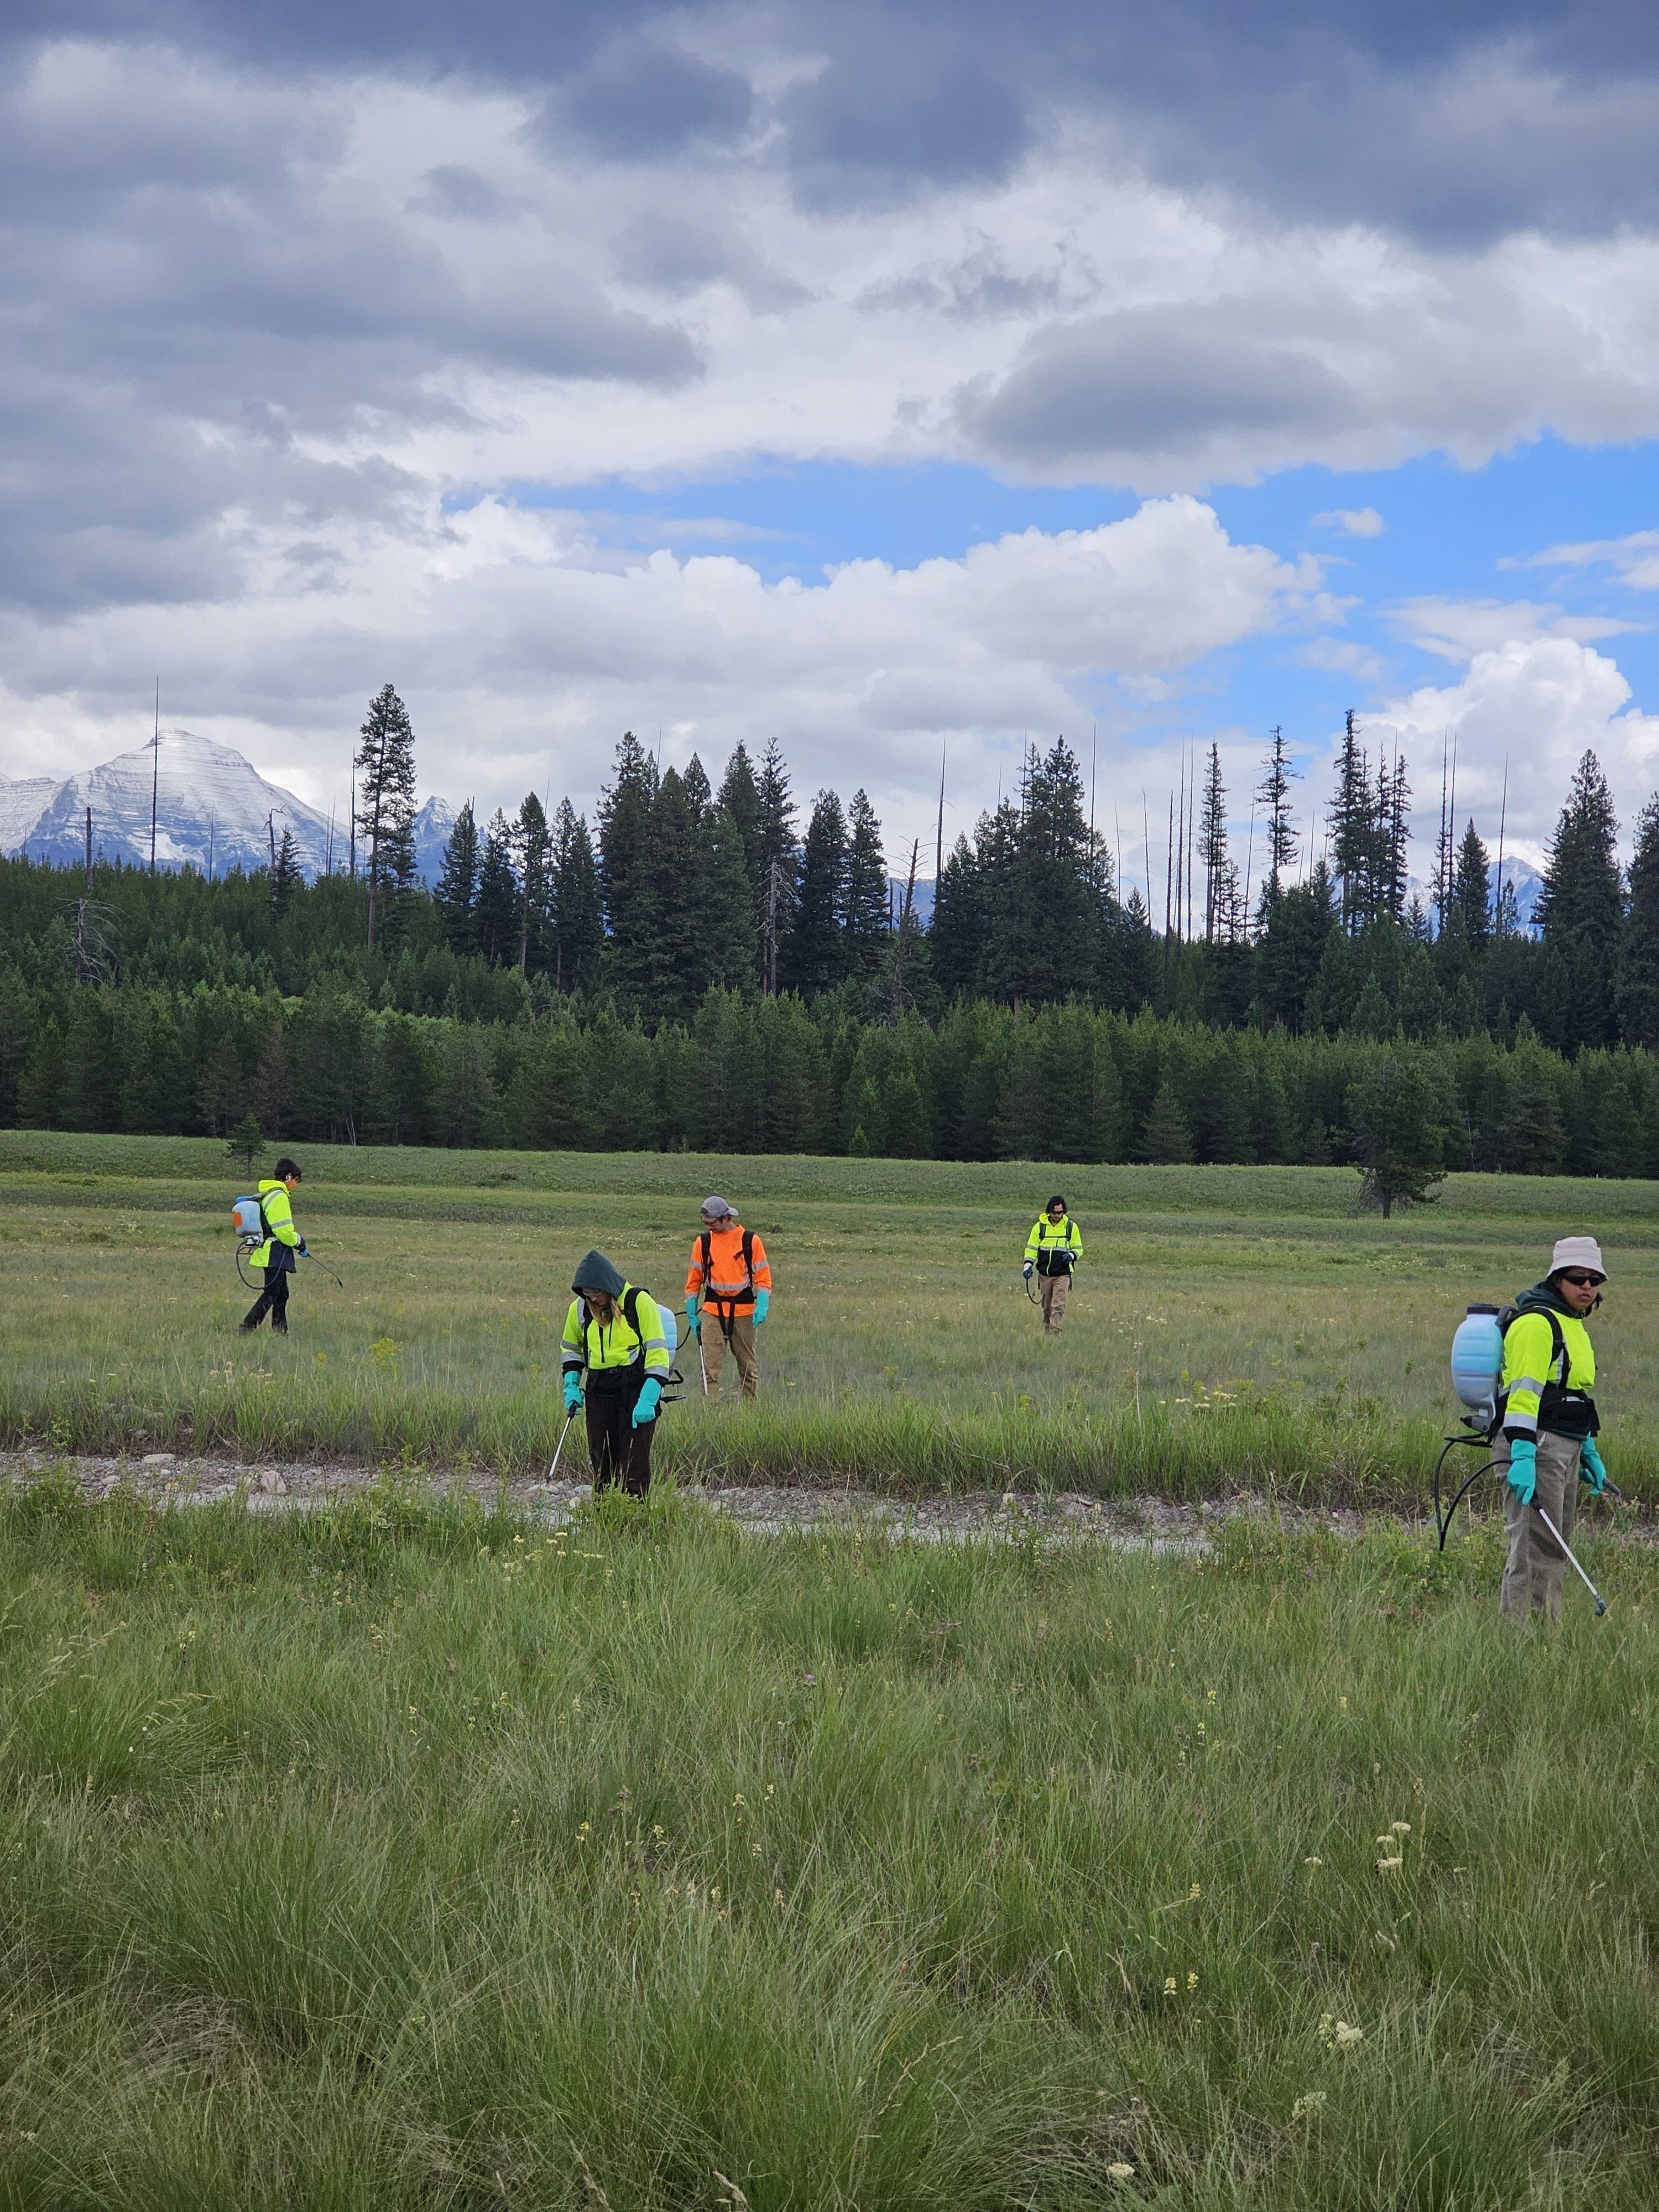 A crew moves through a field wearing backpack sprayers, while spraying weeds.